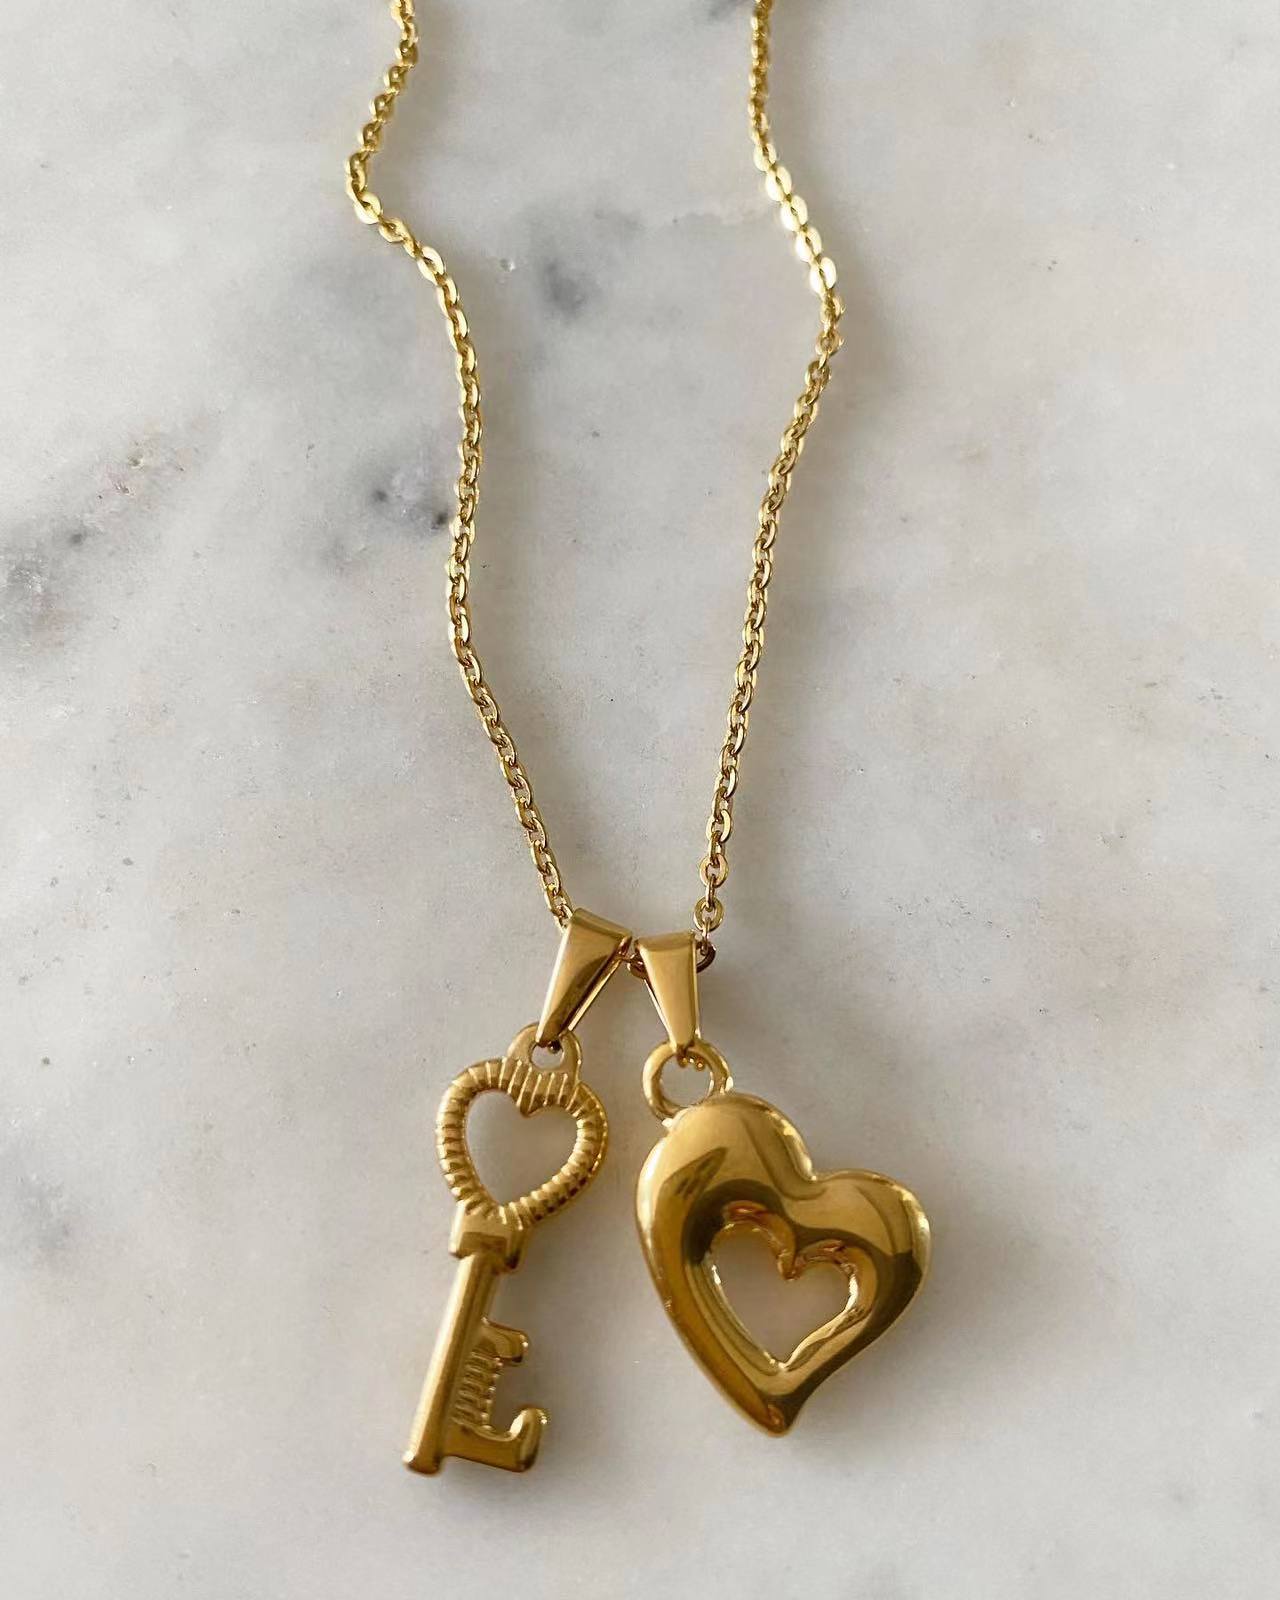 My Heart Belongs To You Necklace